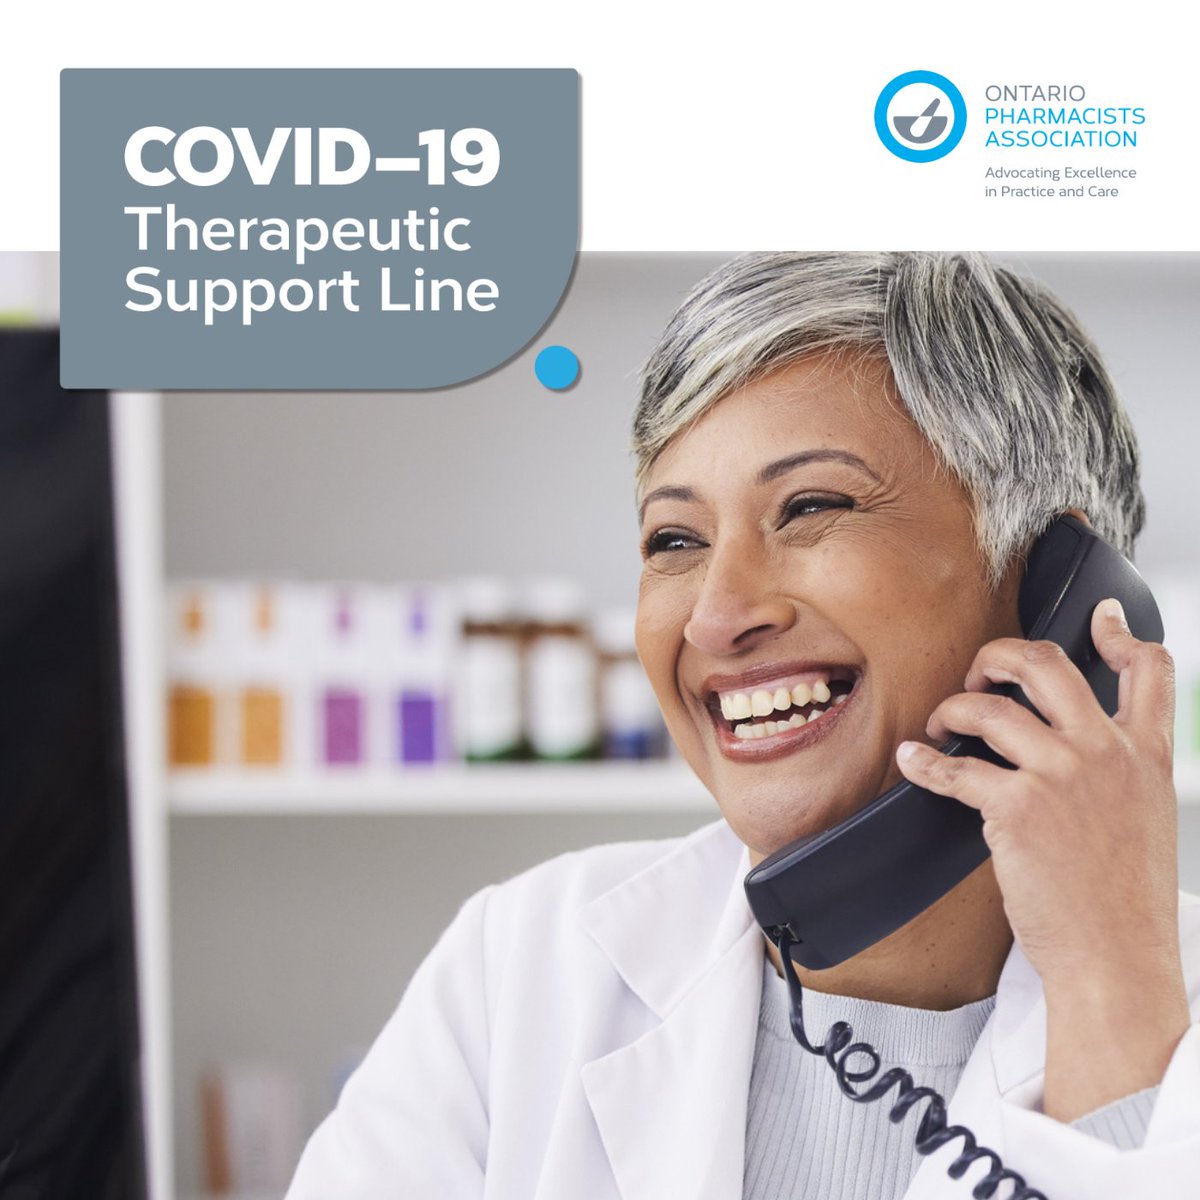 Are you a healthcare professional with a question about COVID-19 therapeutics? OPA’s COVID-19 Therapeutic Support Line is a consultation service for those who seek guidance in prescribing and accessing therapeutics for patients with COVID-19: ow.ly/sB6p50QiXBt